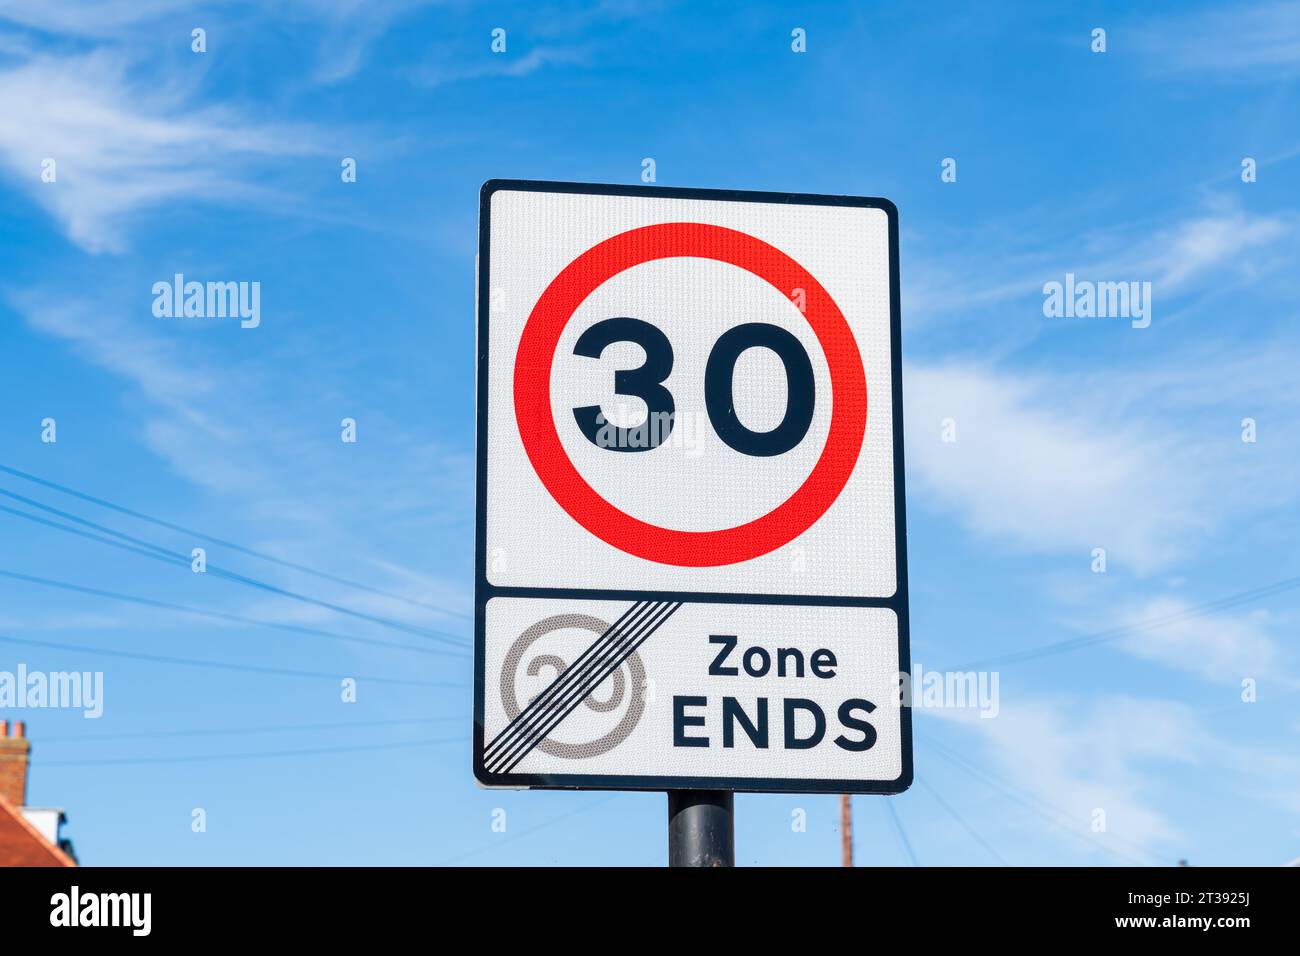 UK Traffic sign showing a 30 mph maximum speed limit after the 20 mph zone ends with a red and white warning circle Stock Photo